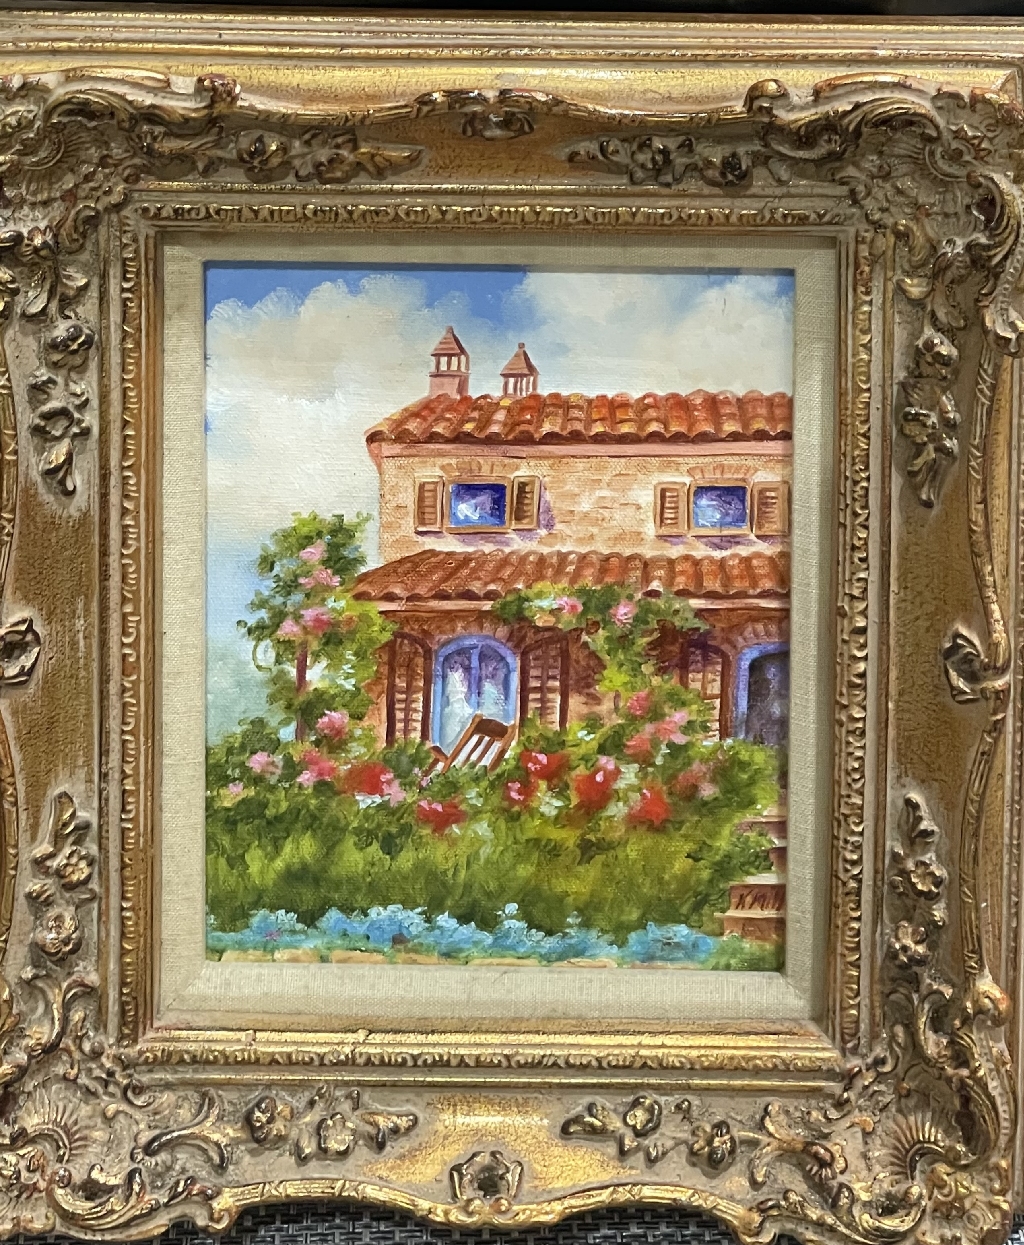 Framed Painting of House with Flowers 
Kathy Mills